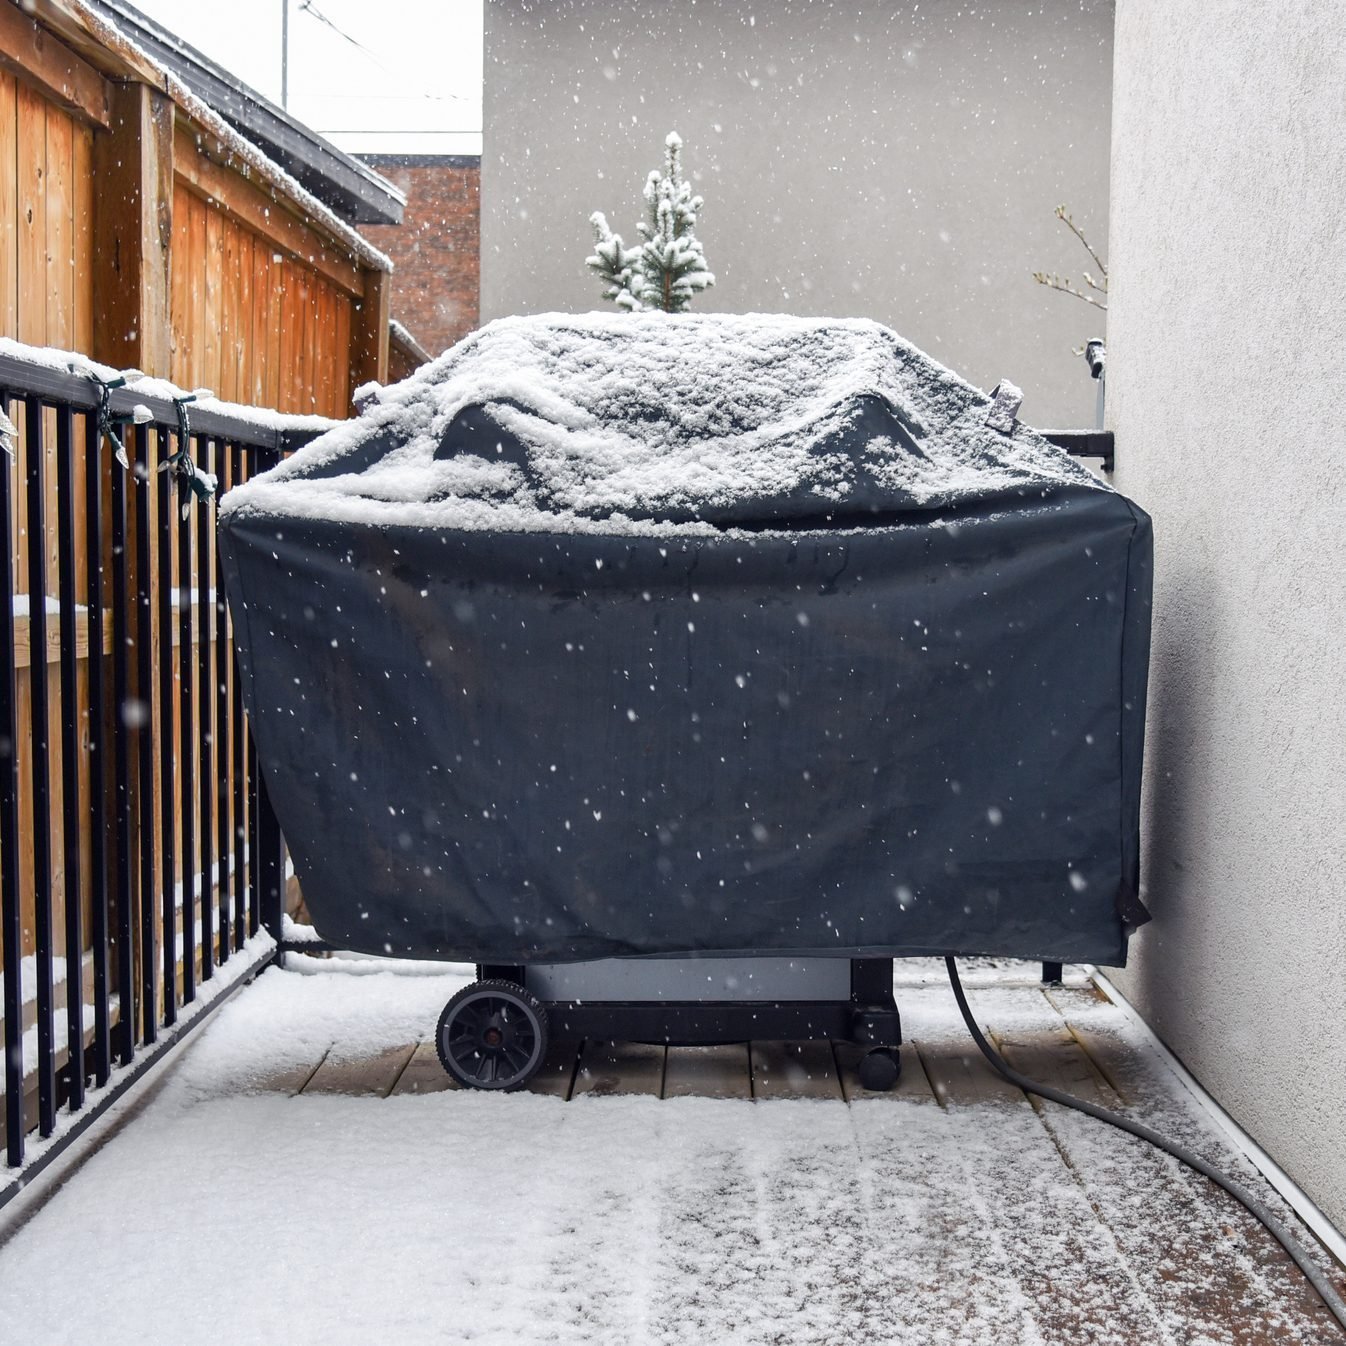 How To Clean and Store Your Outdoor Kitchen for the Winter